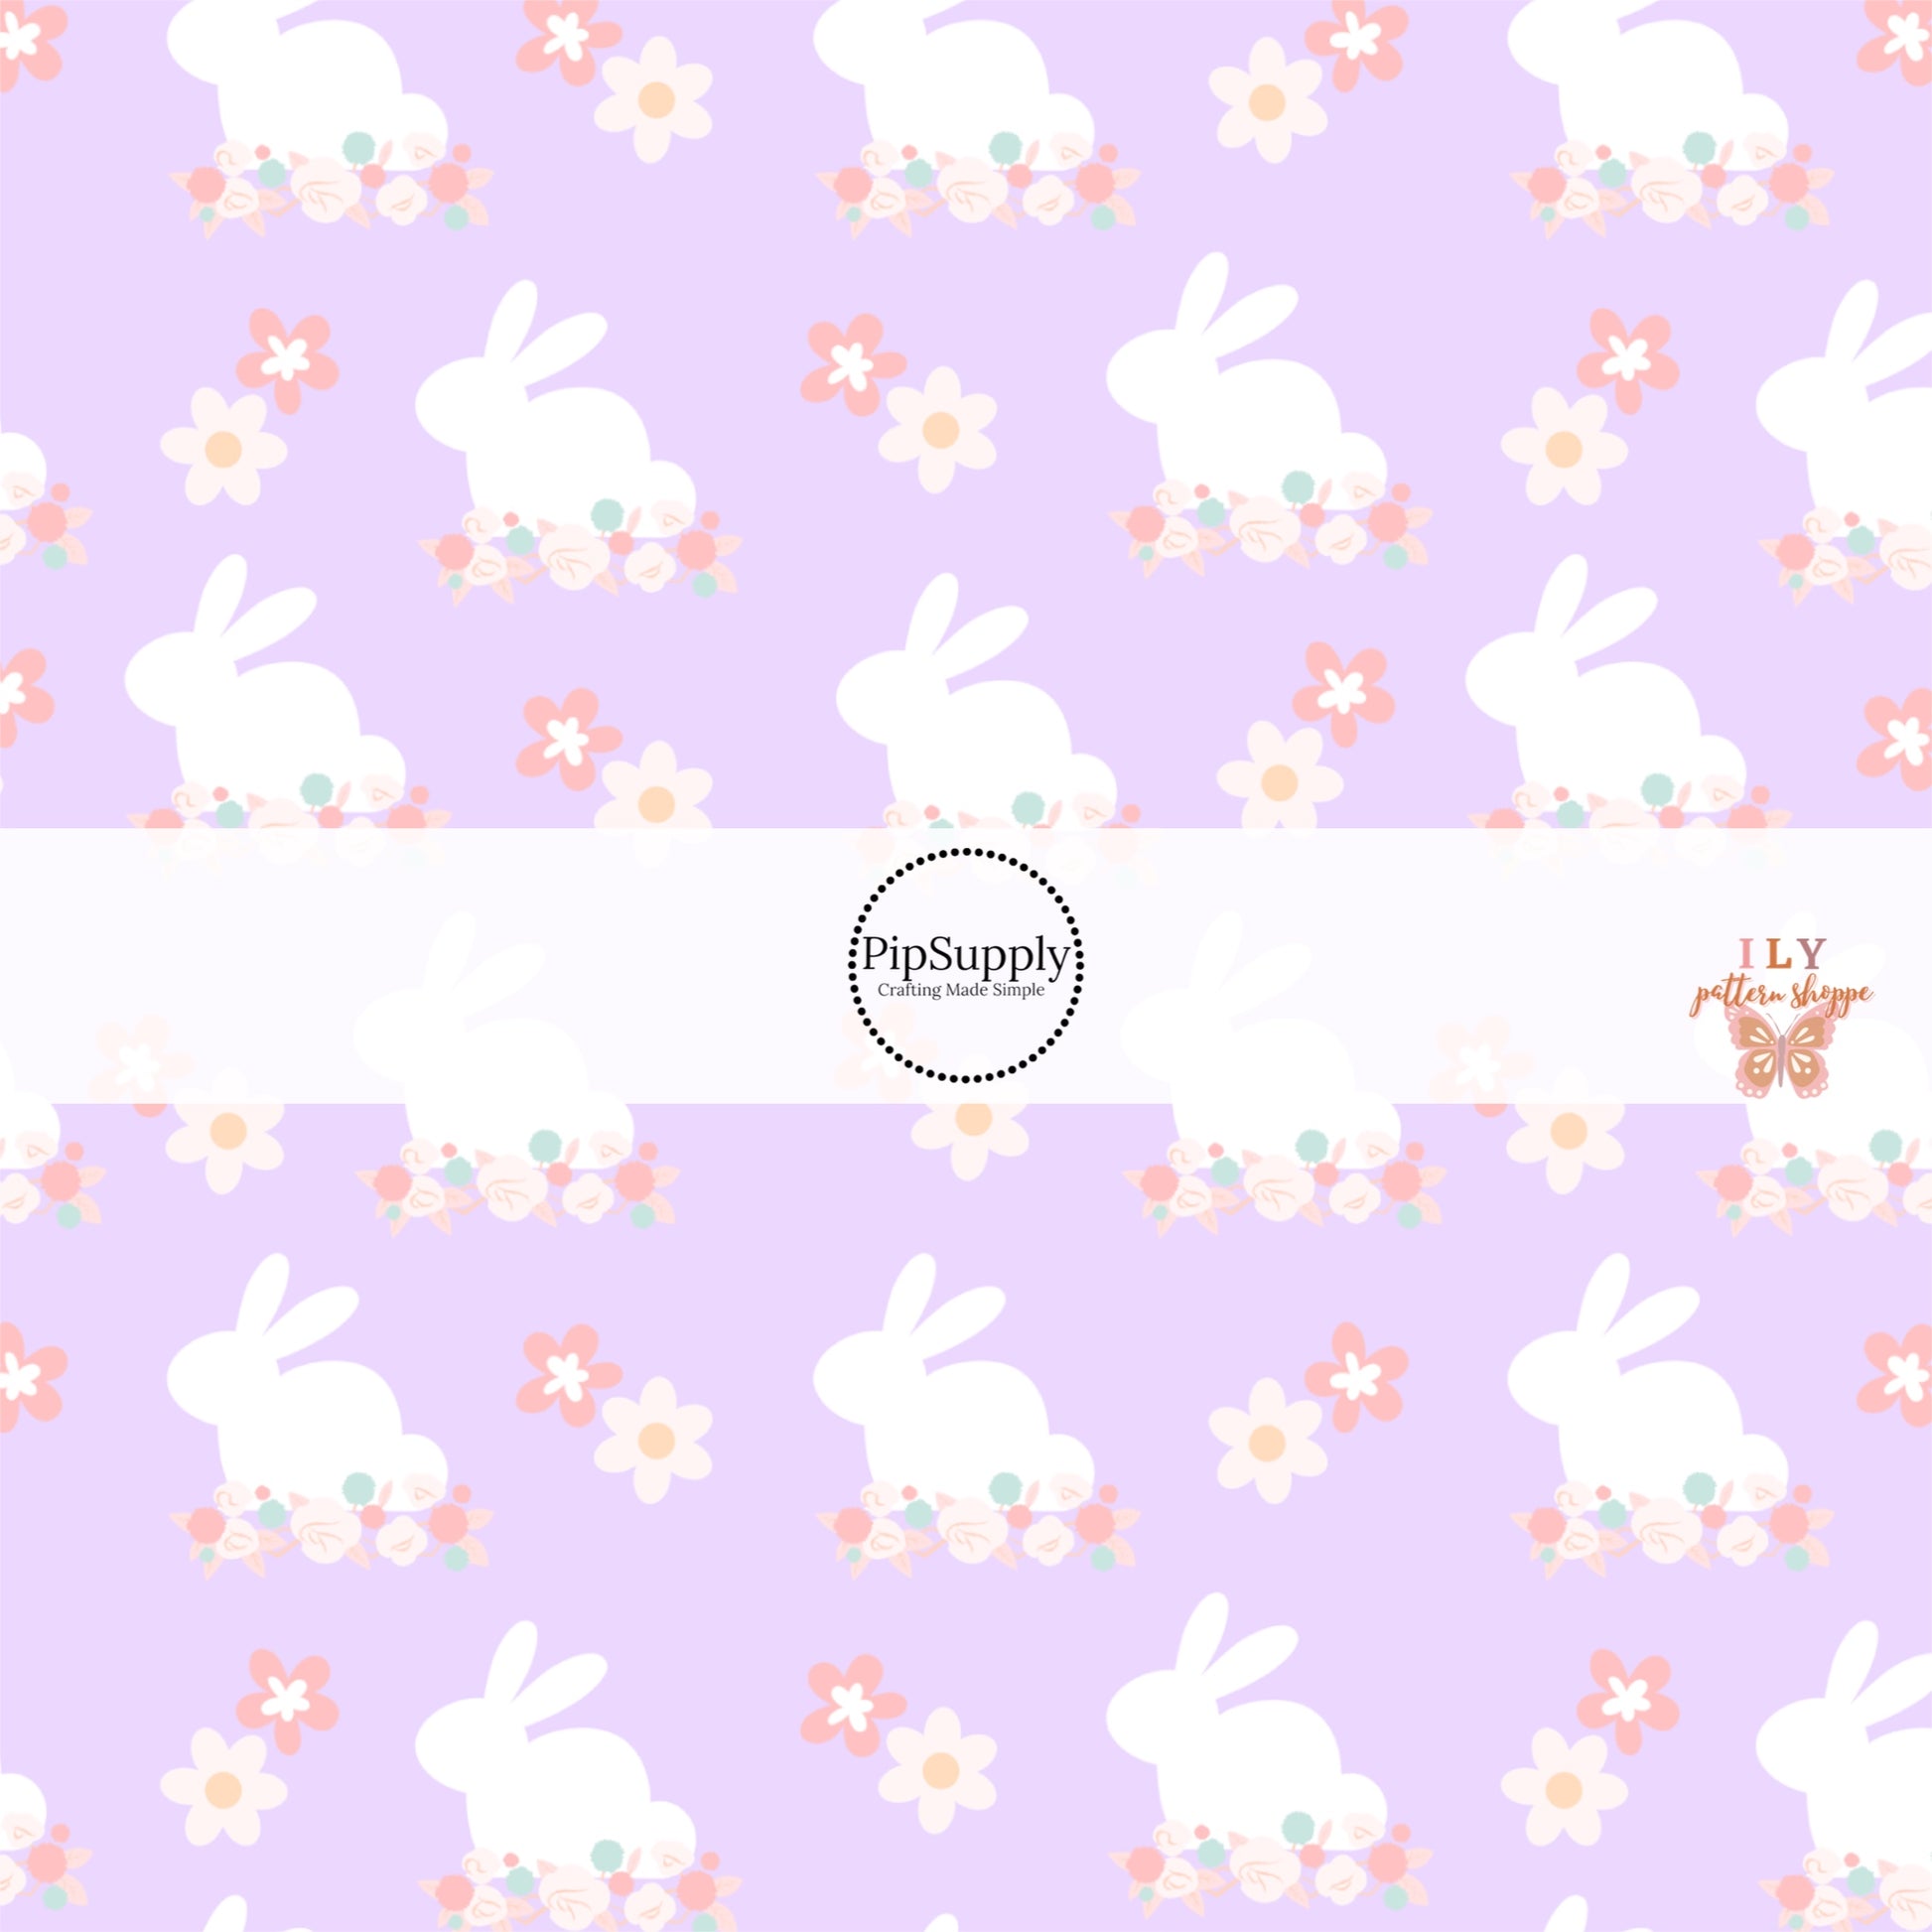 Cream, pink, and blue flowers with white bunnies on lavender bow strips